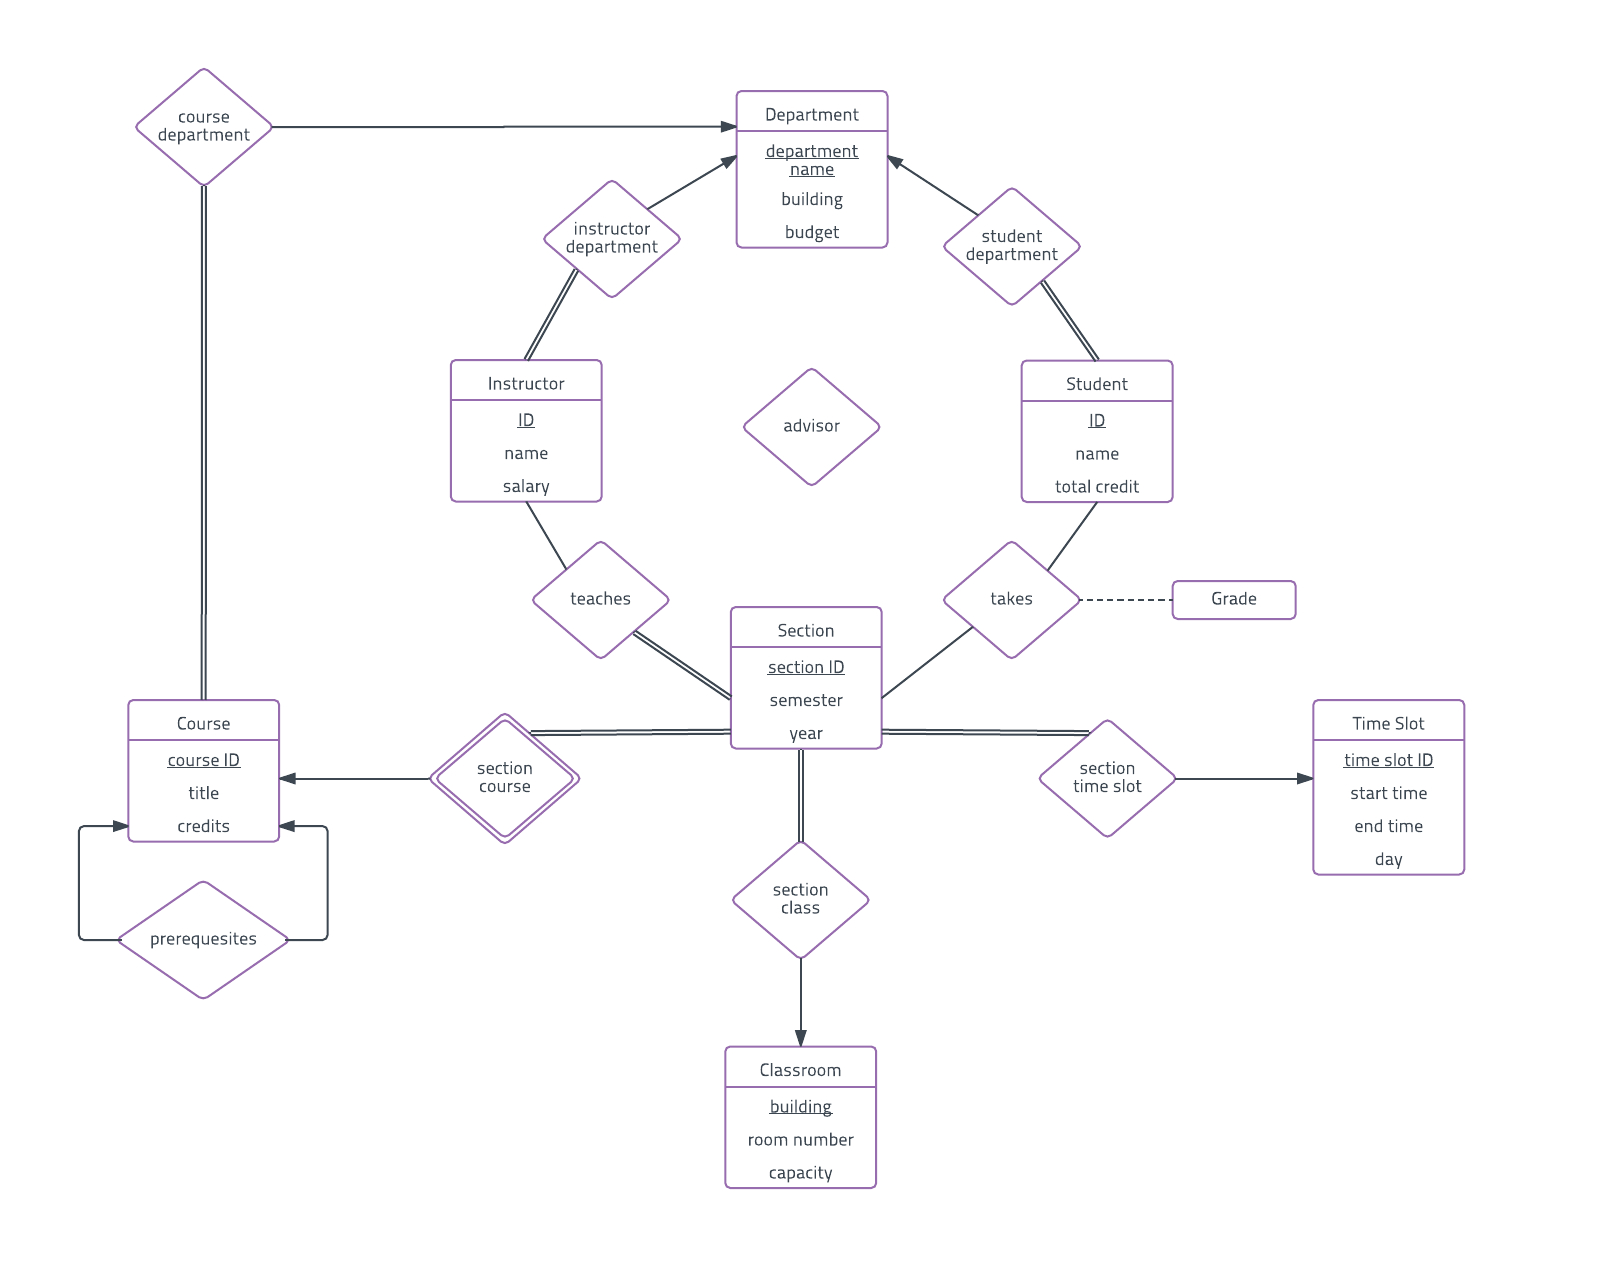 Er Diagram Examples And Templates | Lucidchart within Er Diagram Of Hospital